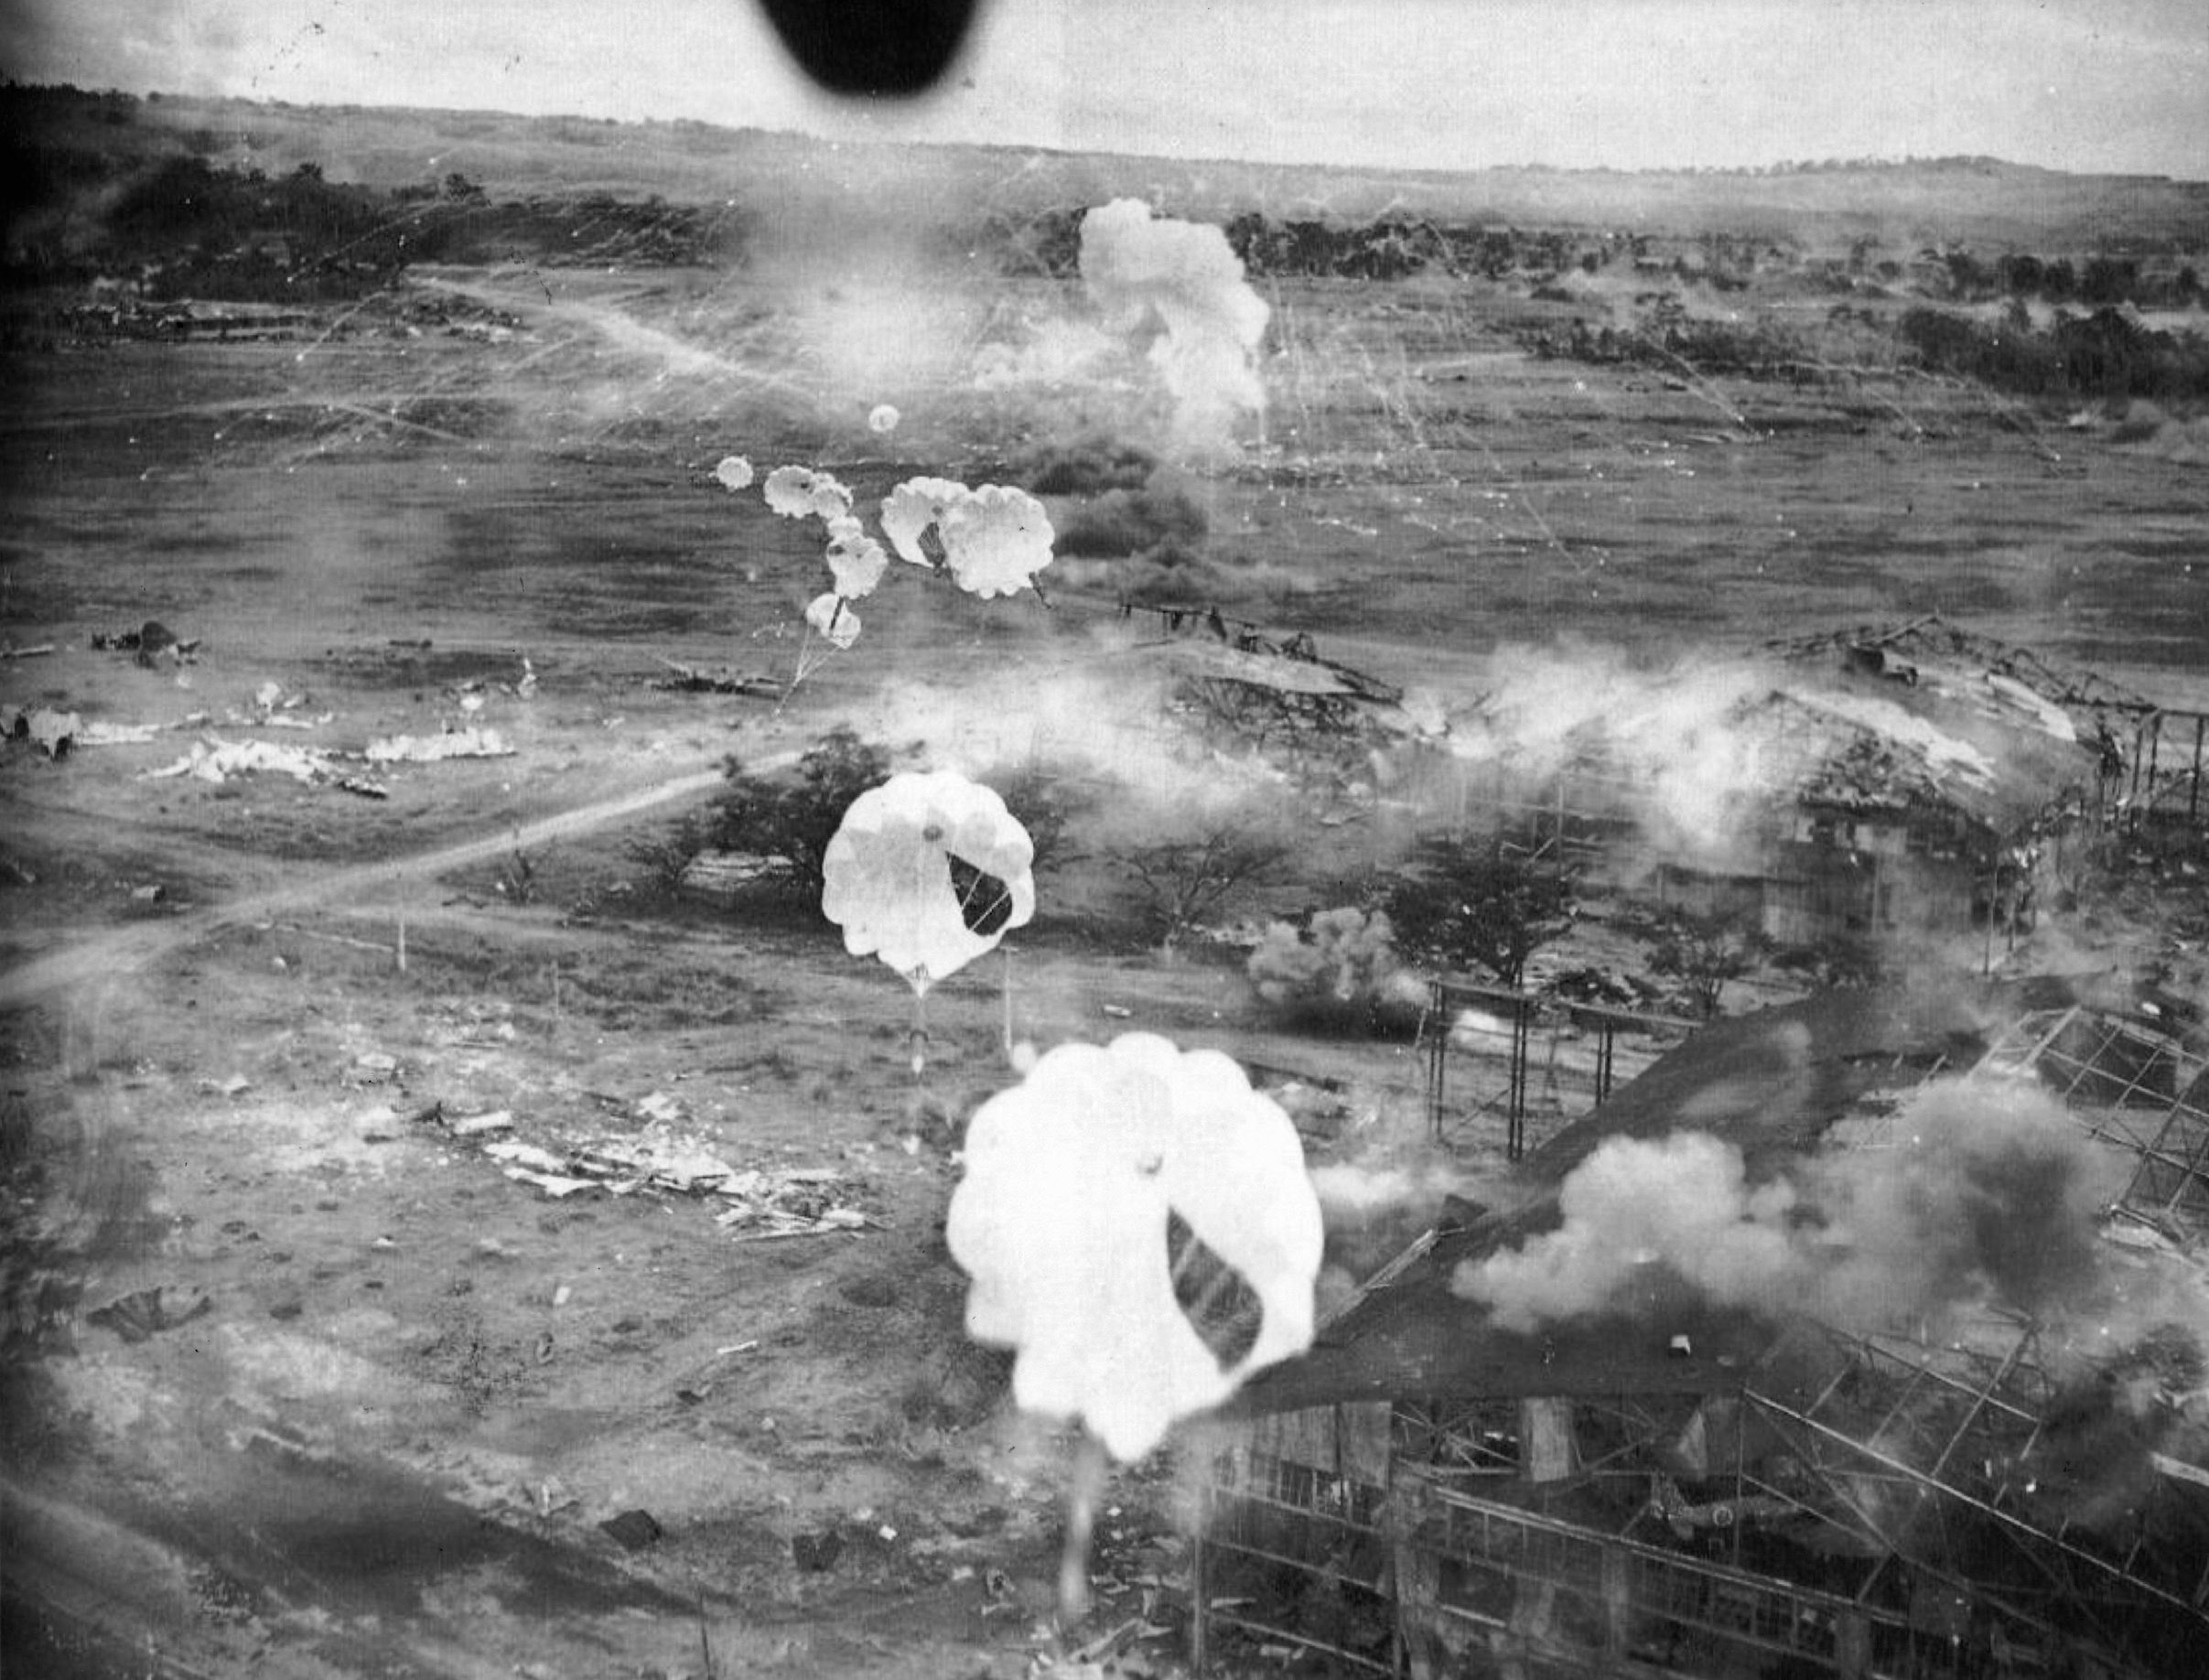 Lieutenant John T. Cooper flies his bomber low over the wreckage of the main hangar complex at Clark Field. The facility has sustained heavy damage, and smoke rises from a phosphorous bomb dropped among Japanese aircraft earlier in the raid. 